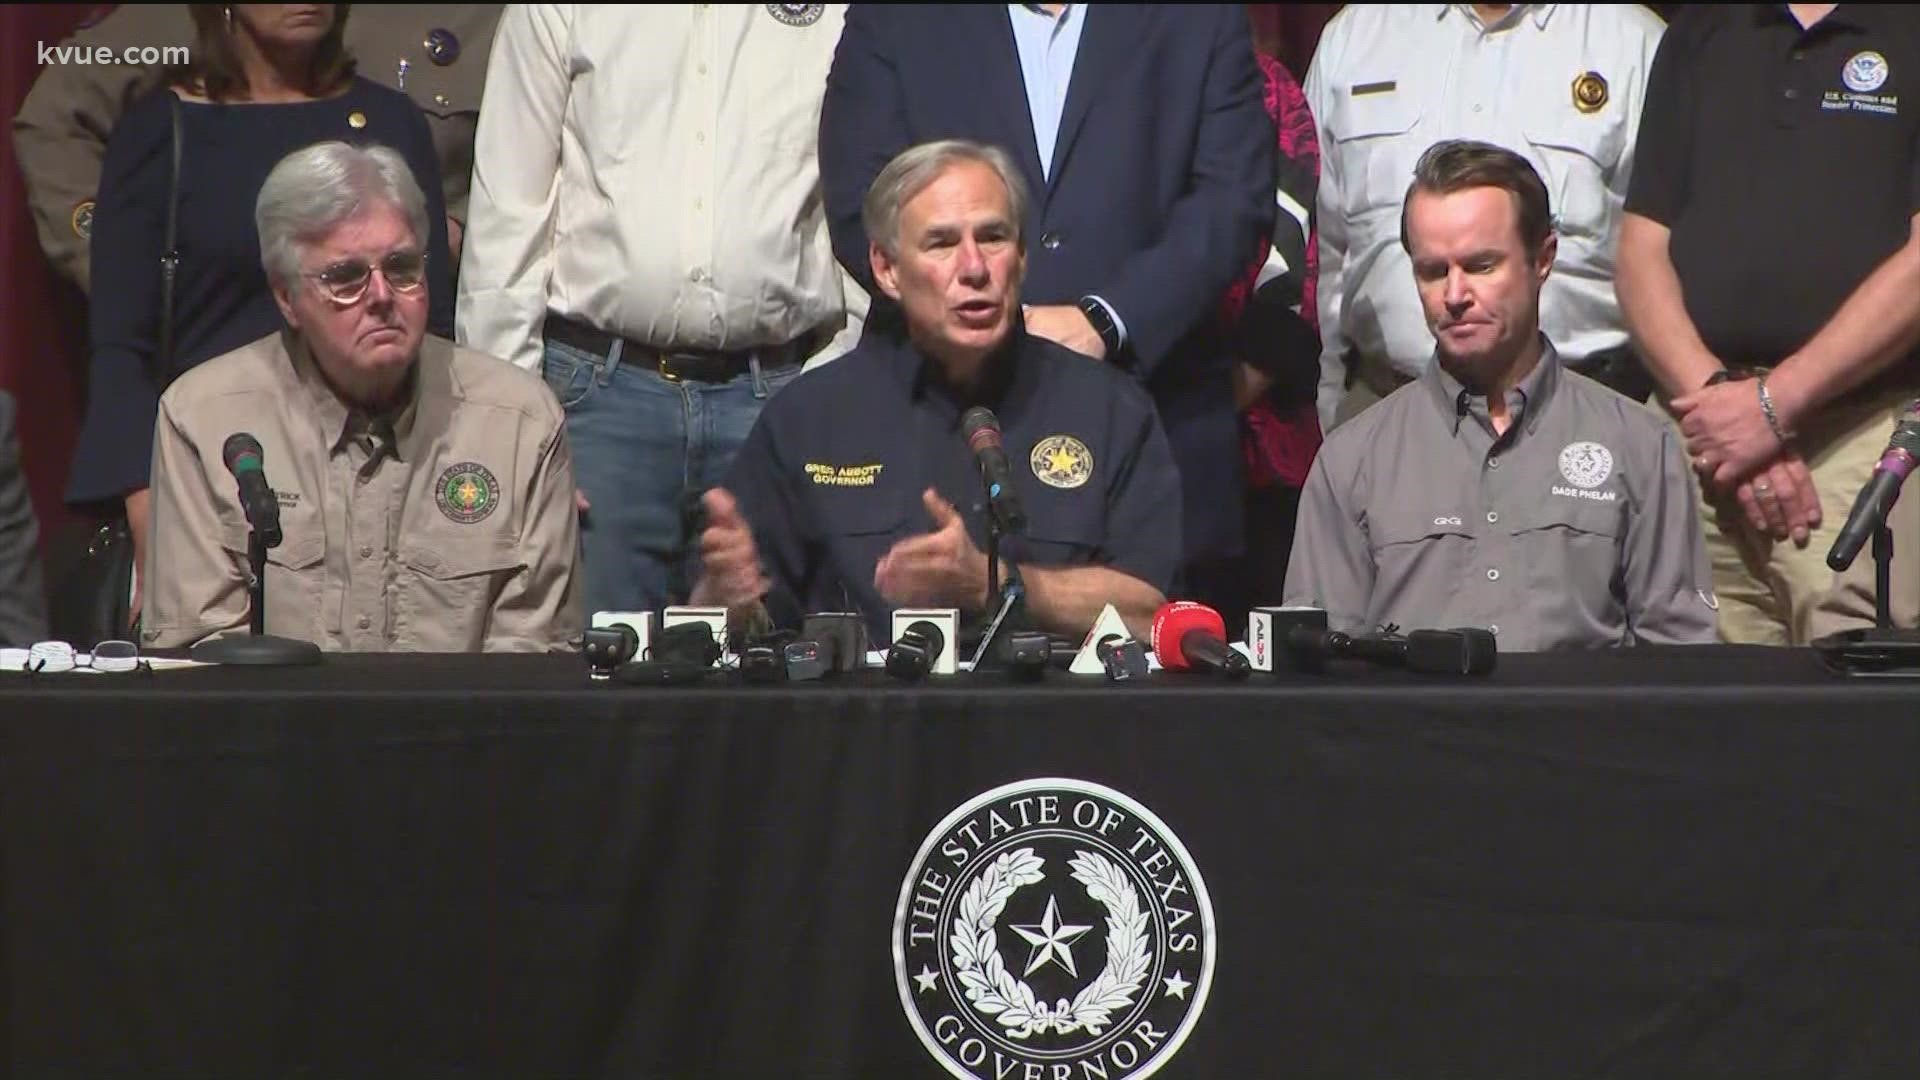 Gov. Greg Abbott addressed policy during his news conference. The conference was interrupted by Democratic gubernatorial candidate Beto O'Rourke.